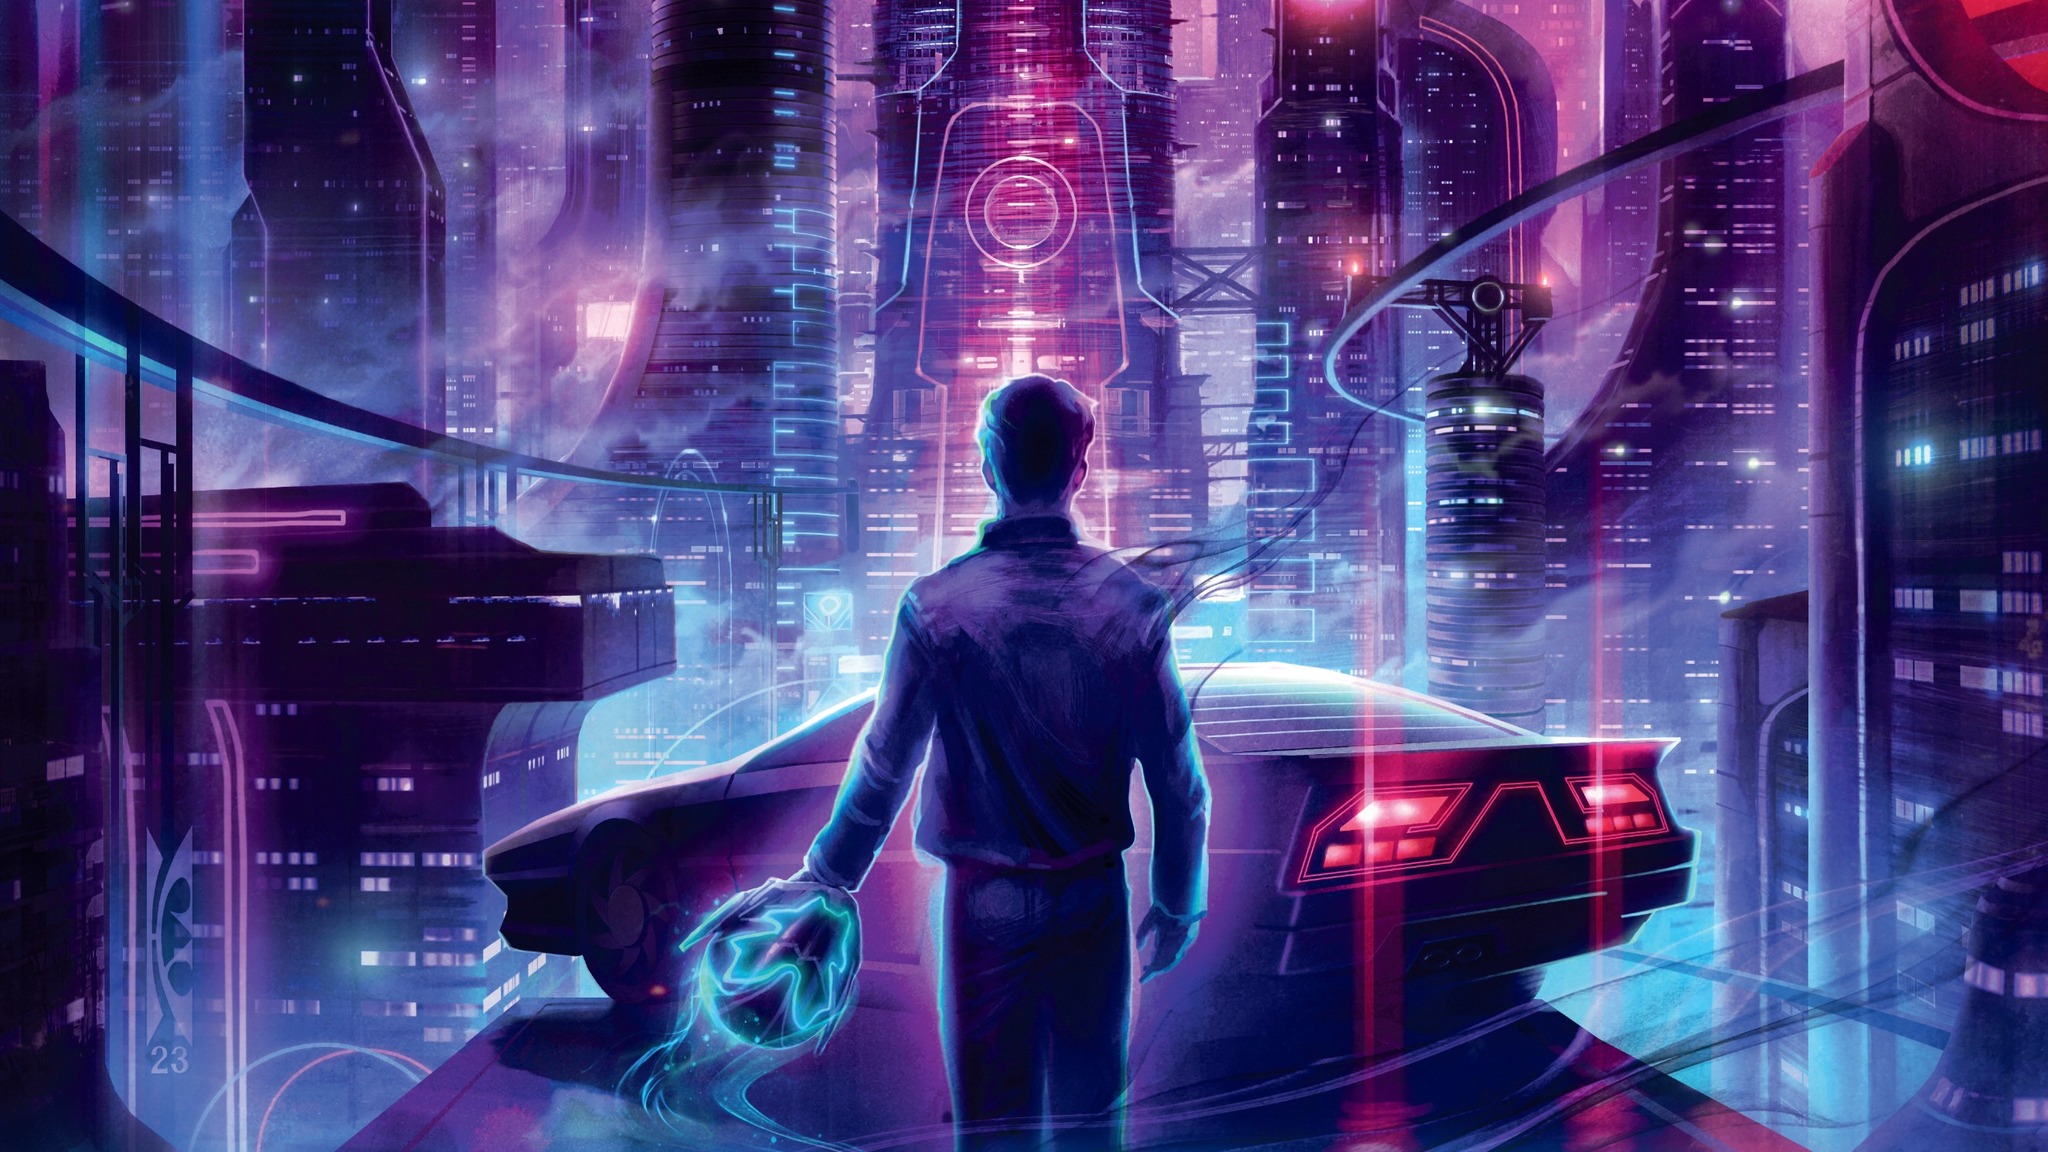 Ign Synthwave Legends Themidnightla Are Making The Jump